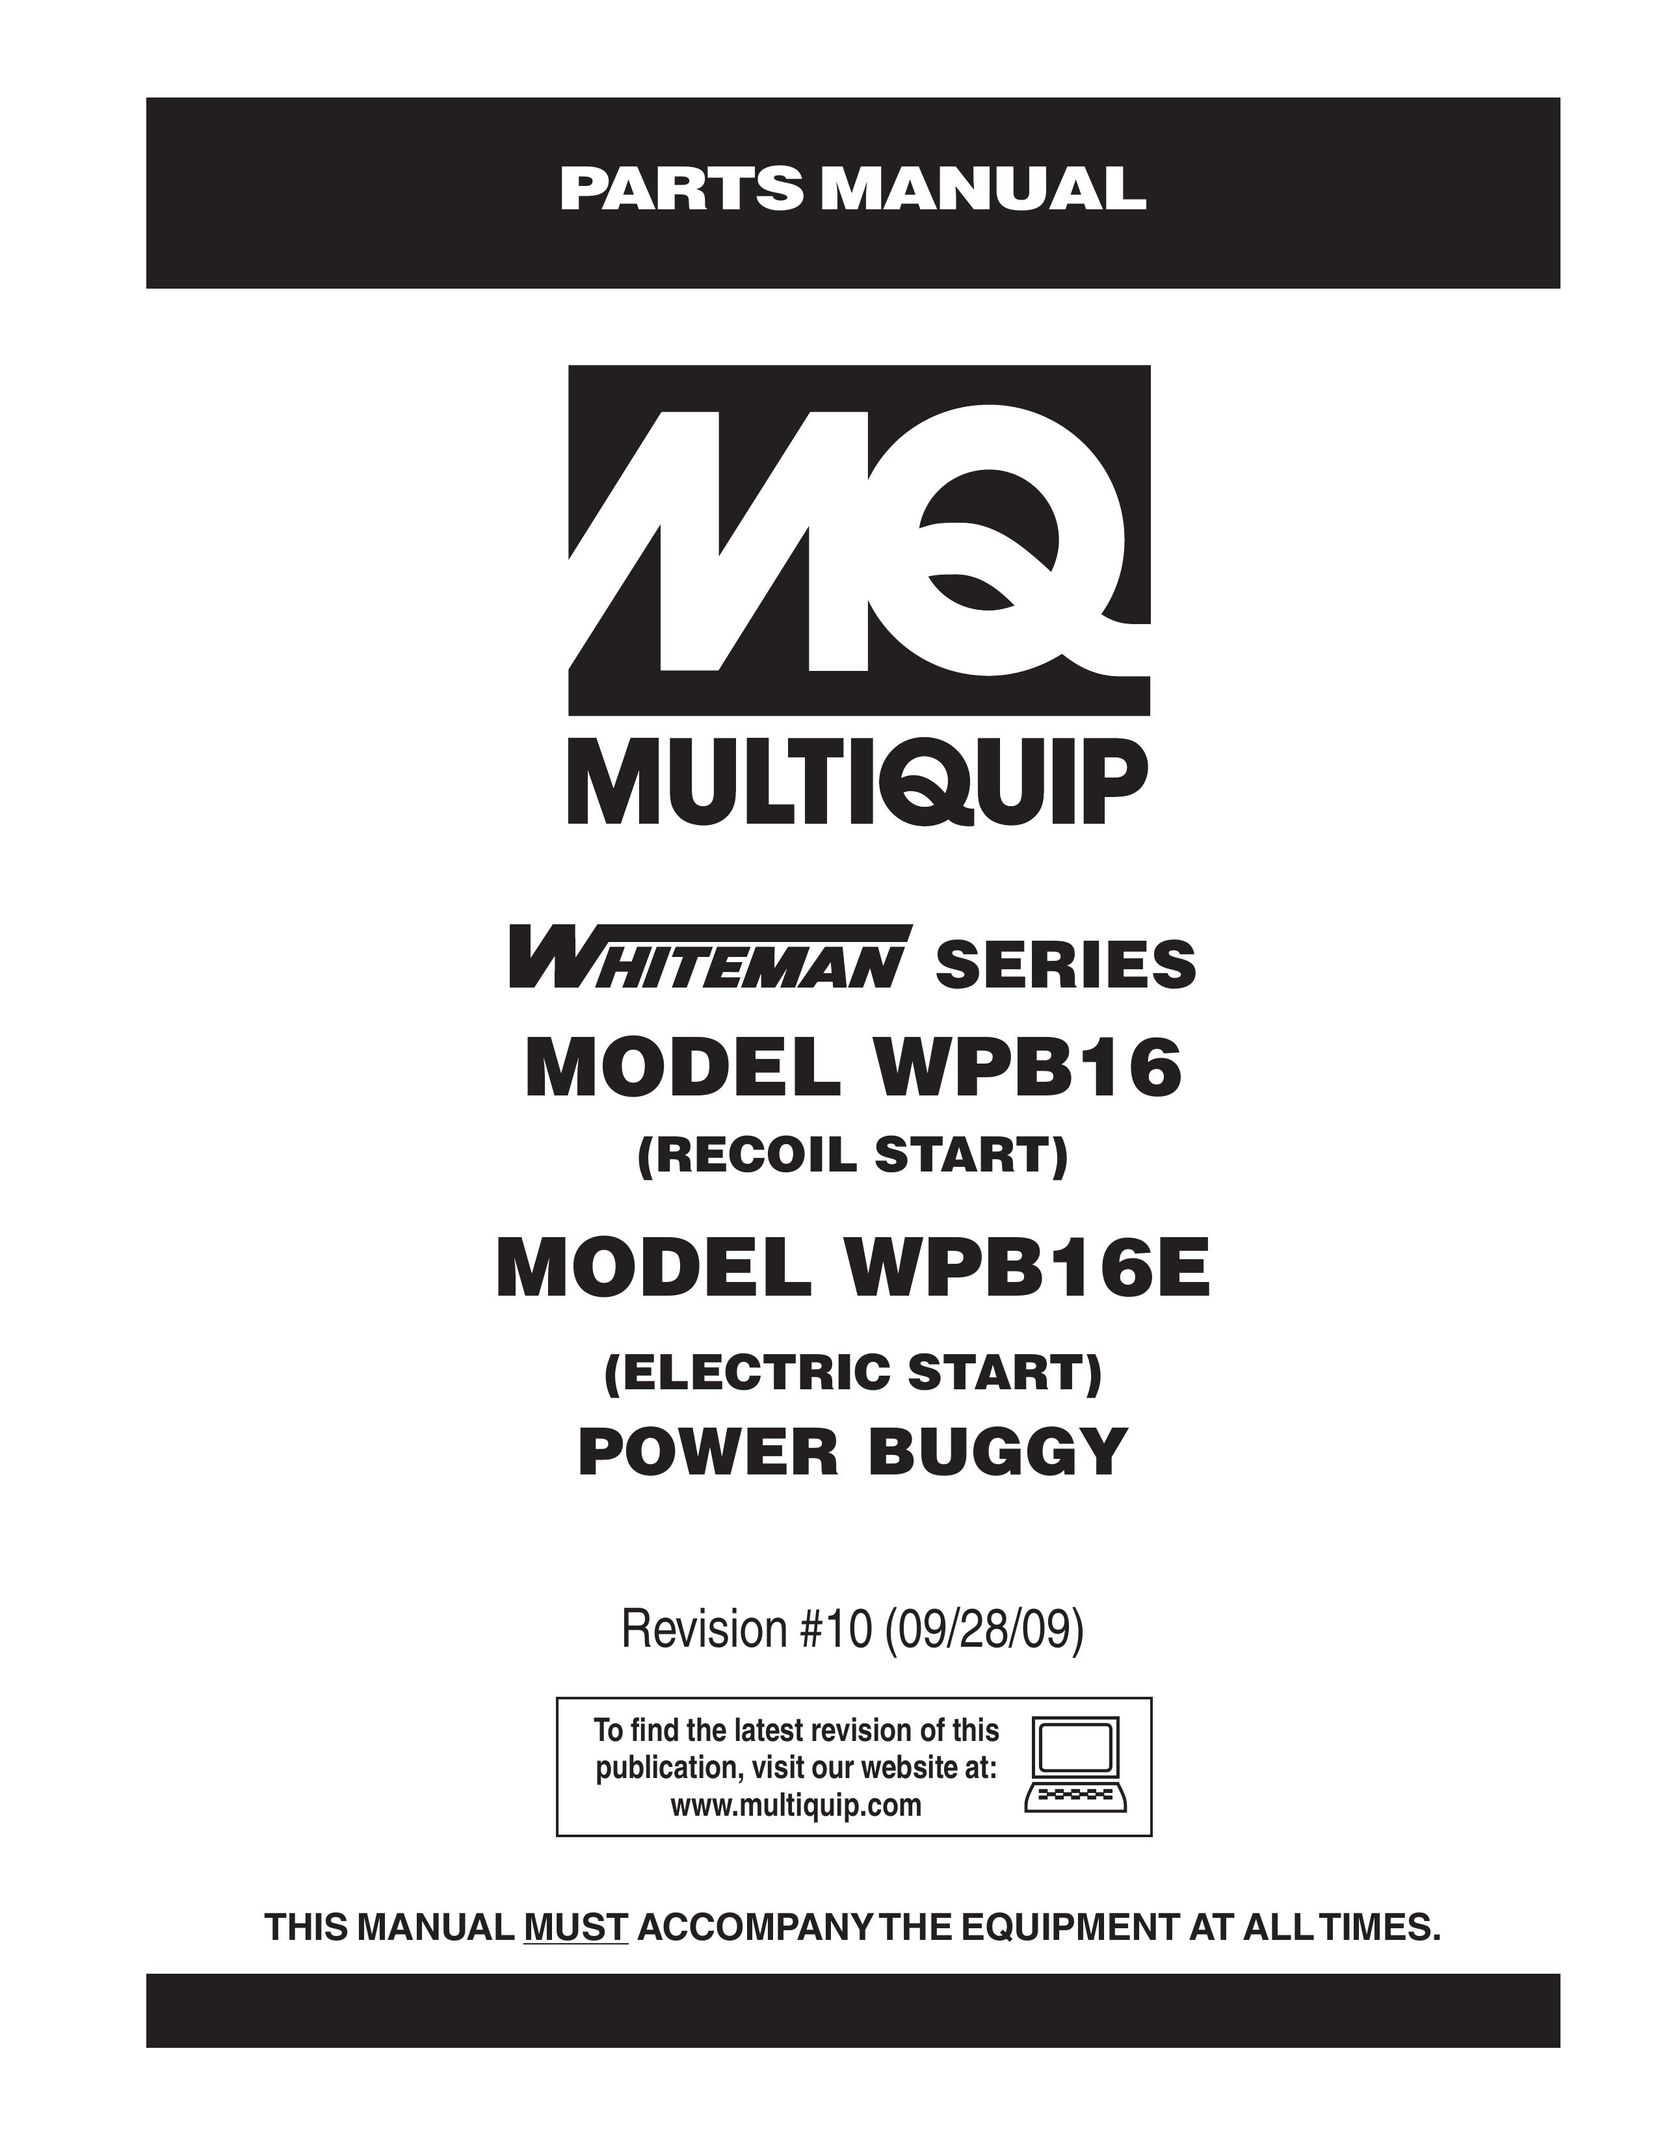 Multiquip WPB16 (Recoil Start) Bouncy Seat User Manual